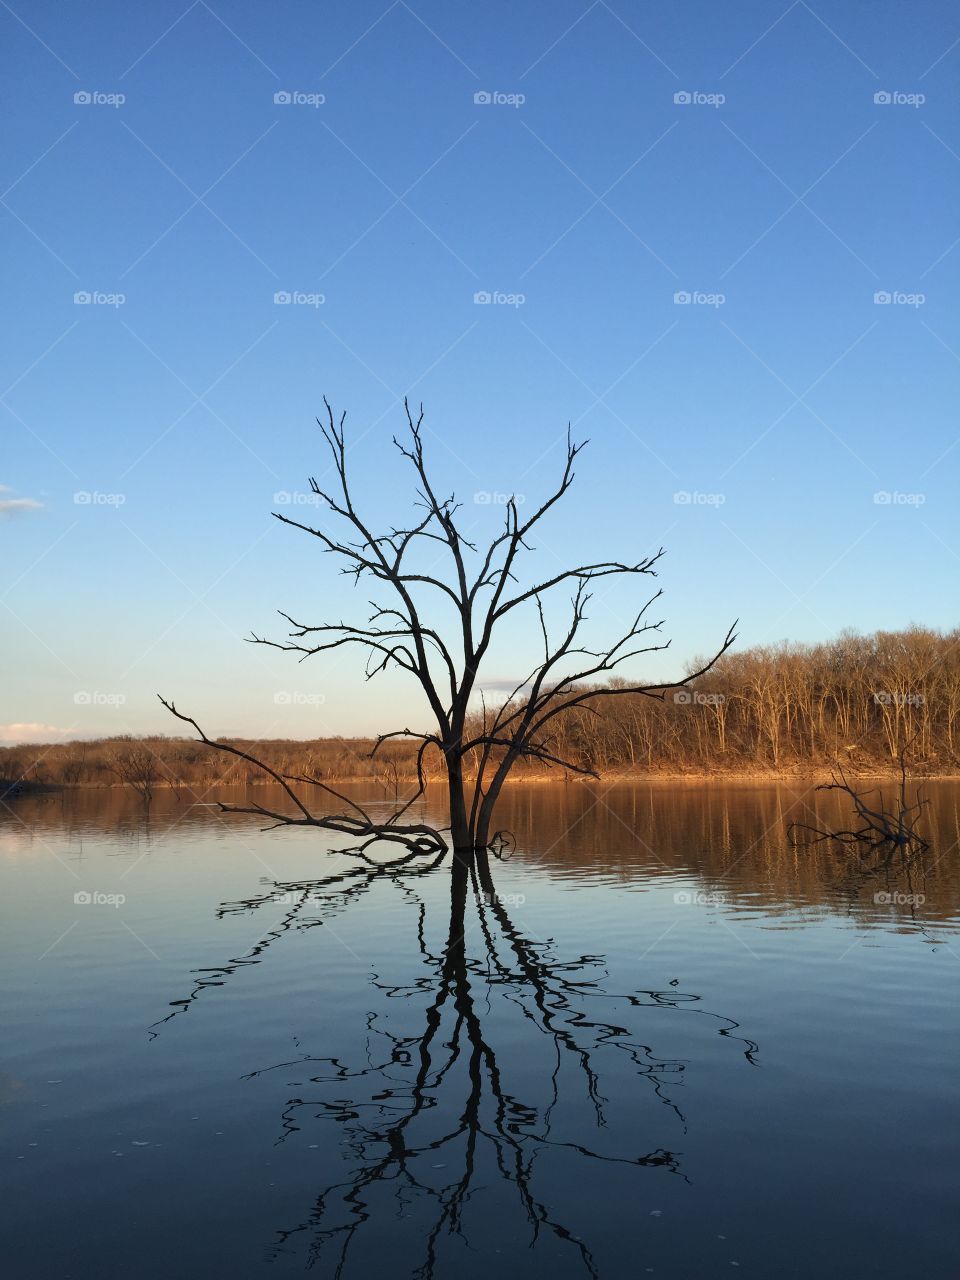 Tree in the lake